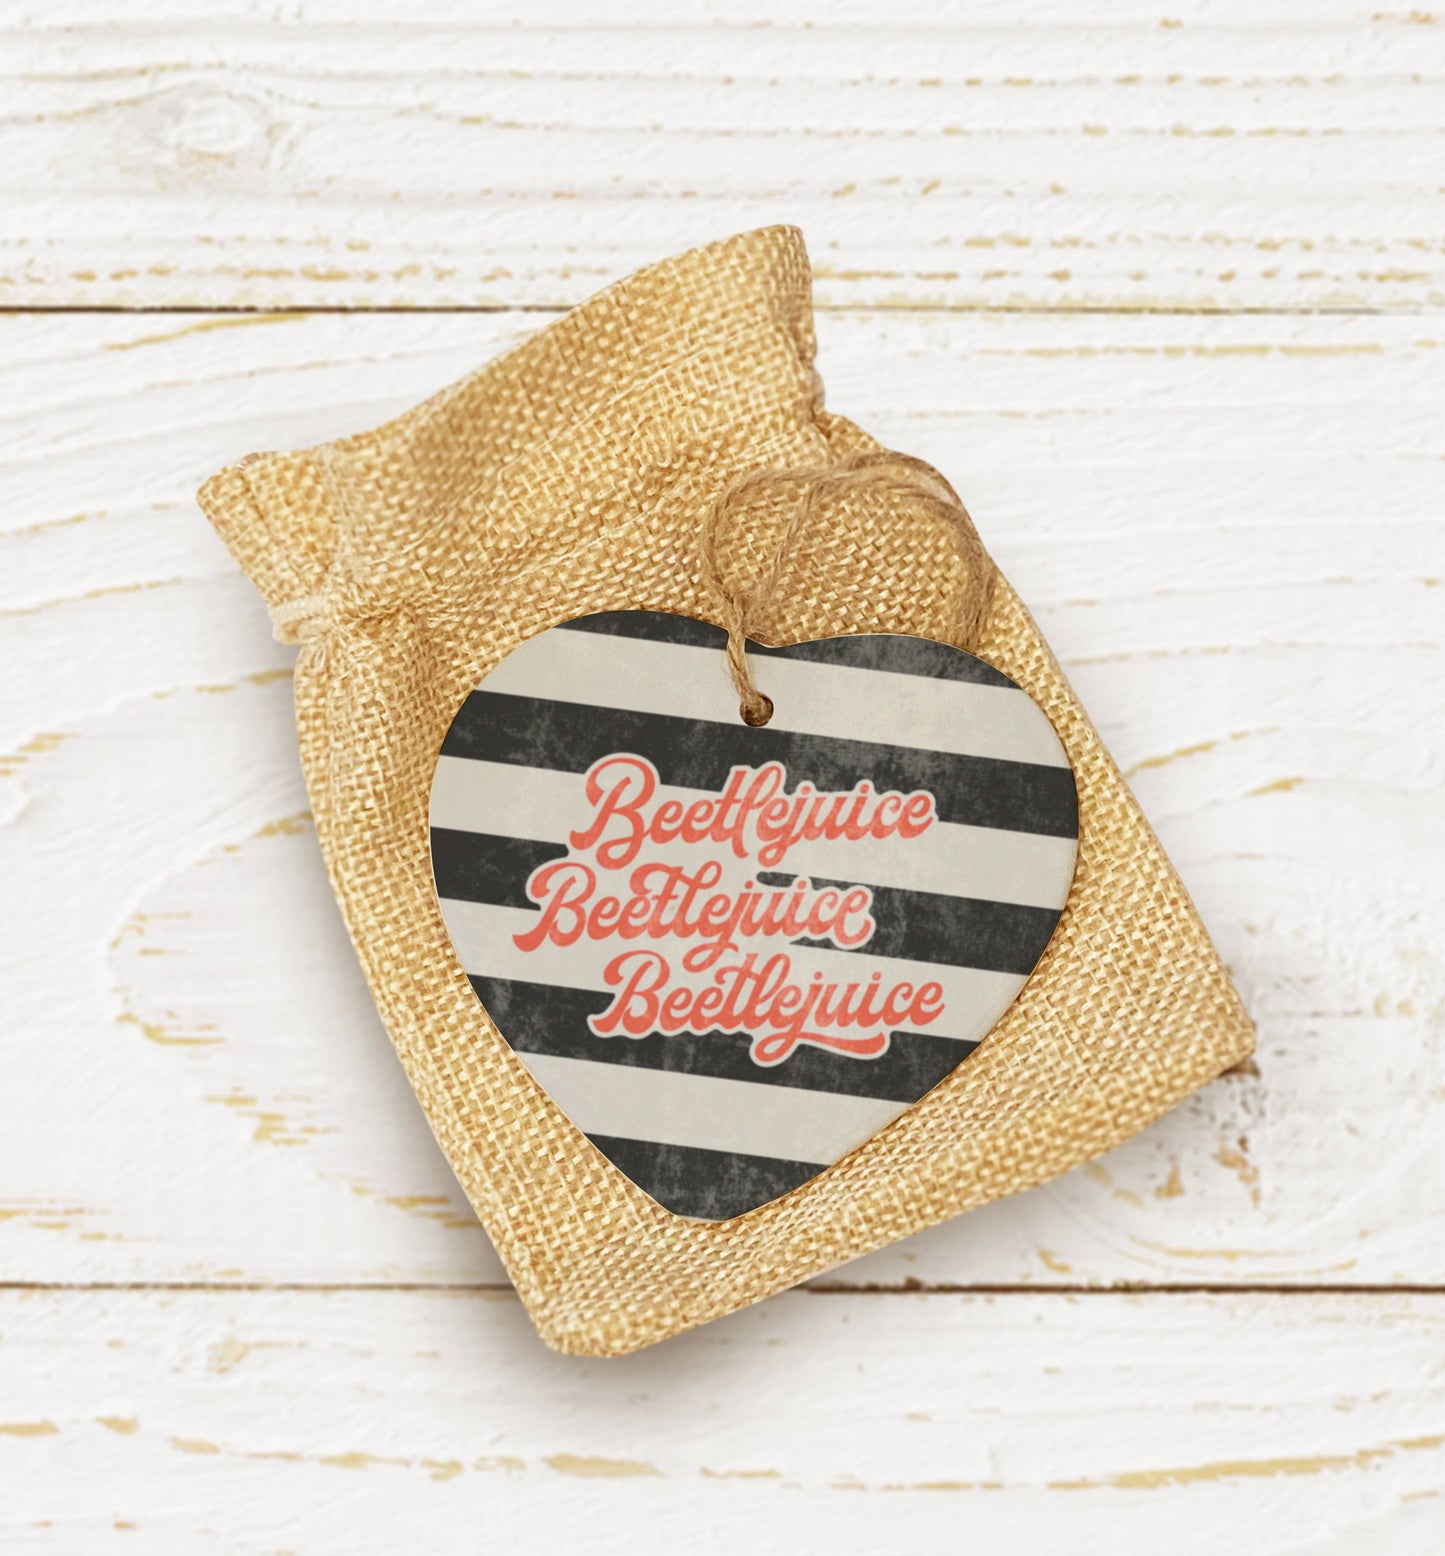 Beetlejuice Ceramic Hanging Heart. Cute Halloween Decoration. Cute Decoration. Cute Loved one gift. Halloween Ornament.